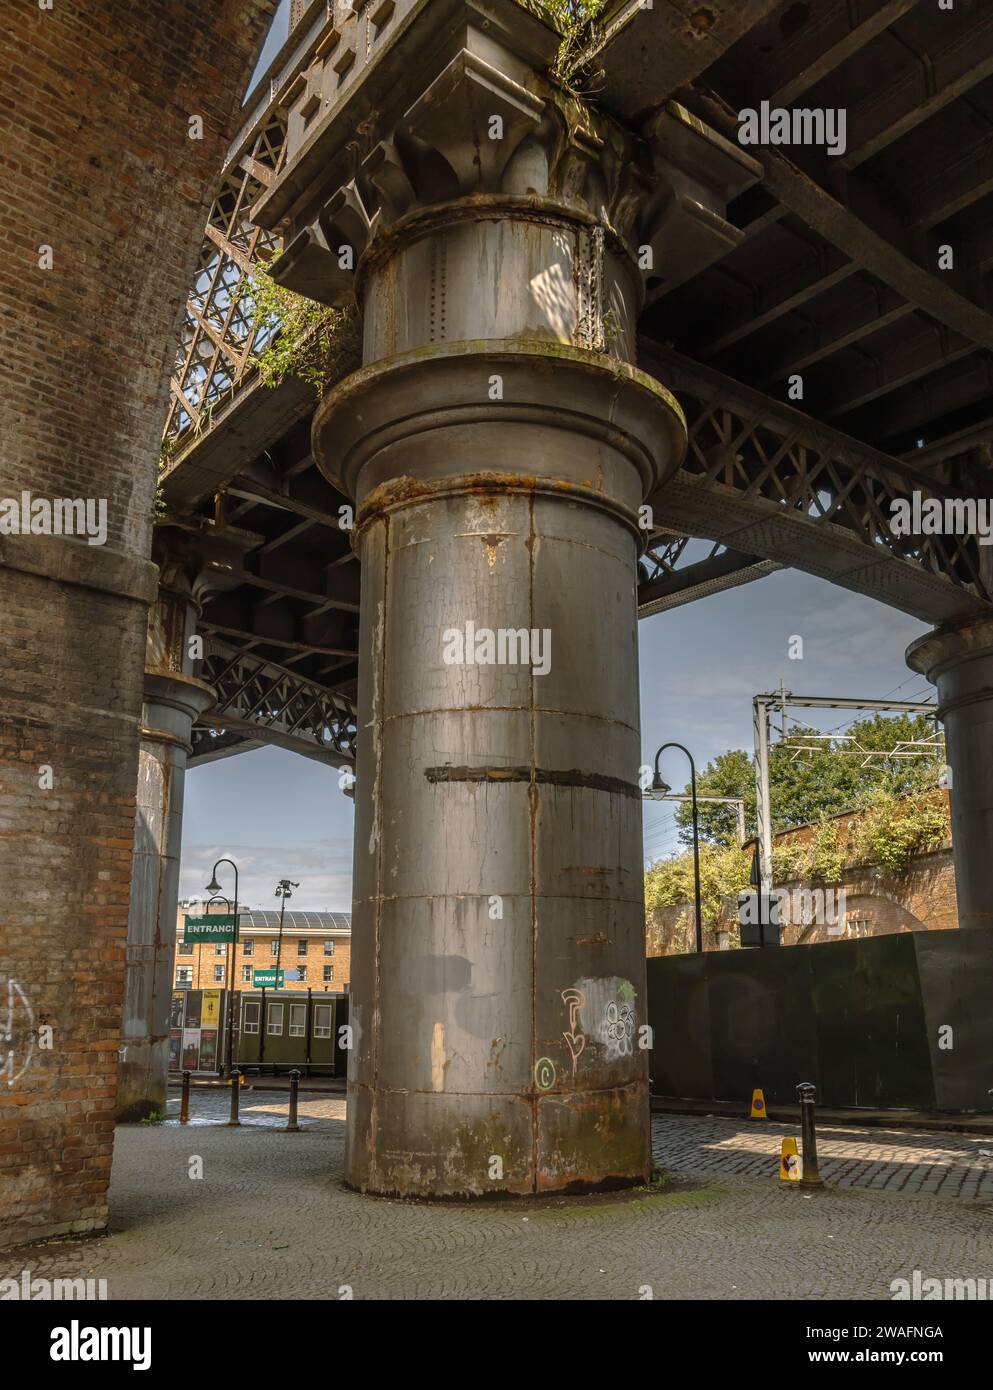 Detail of a steel rail bridge supported by a large metal pillar. Concept of strength, connectivity, support or travel. Stock Photo